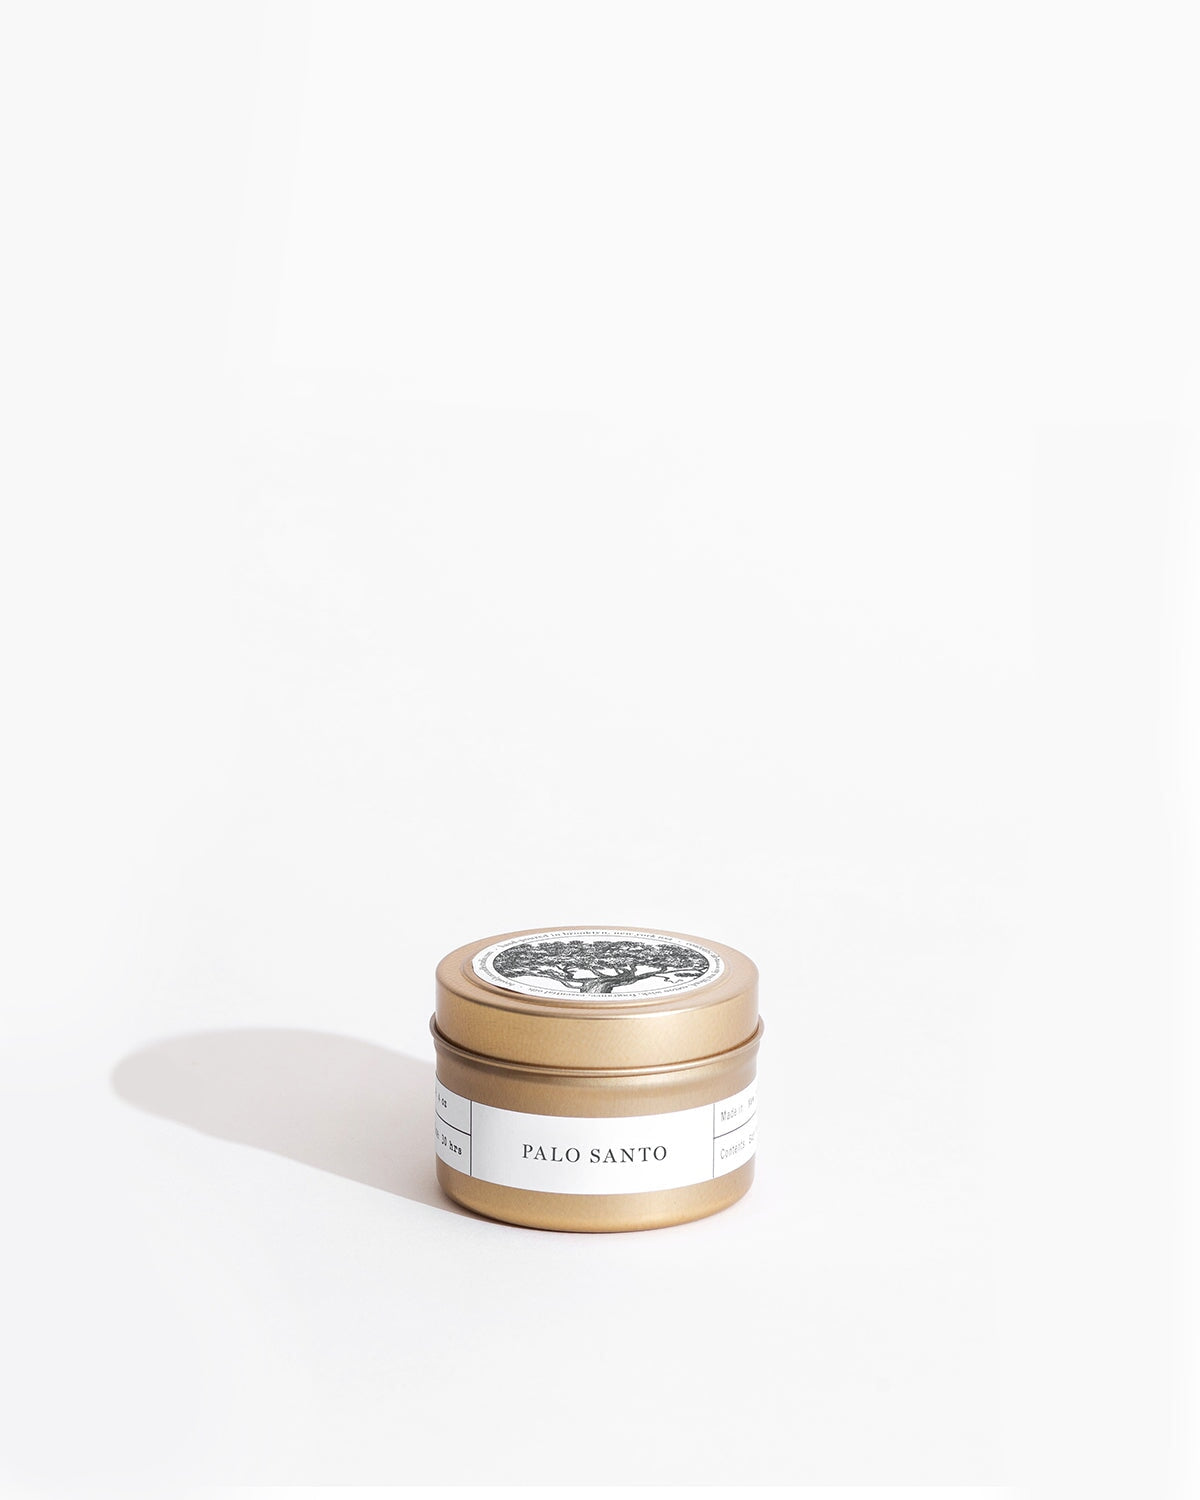 Palo Santo Gold Travel Candle by Brooklyn Candle Studio - Sumiye Co